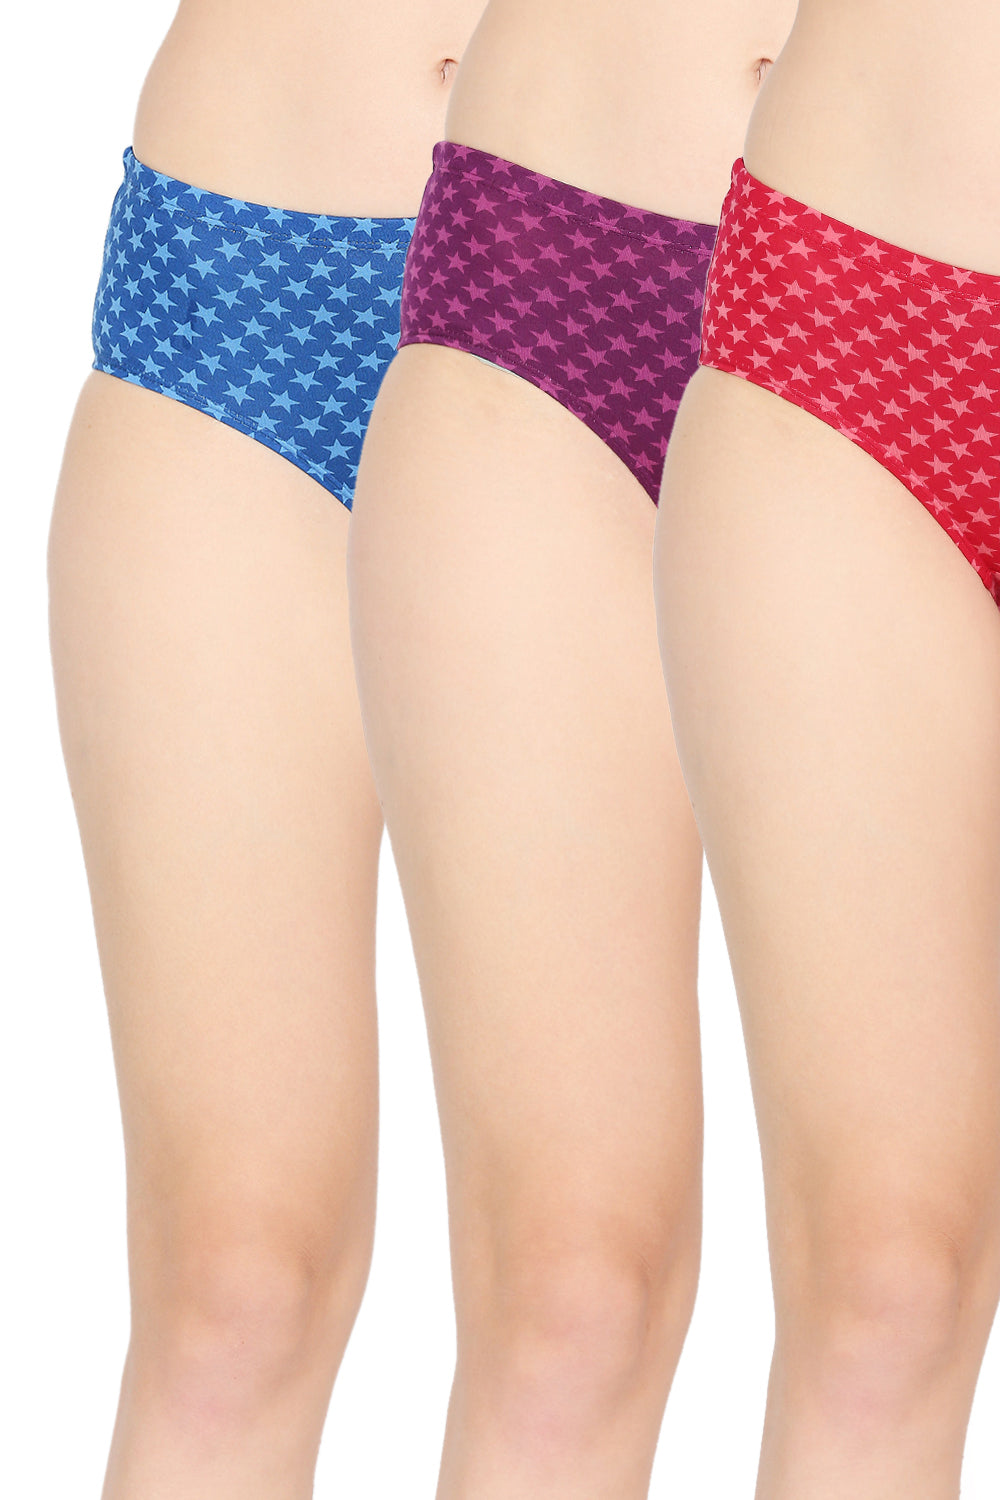 Red Rose Roma Printed Cotton Full Coverage Hipster Panties - Multicolor Pack of 3